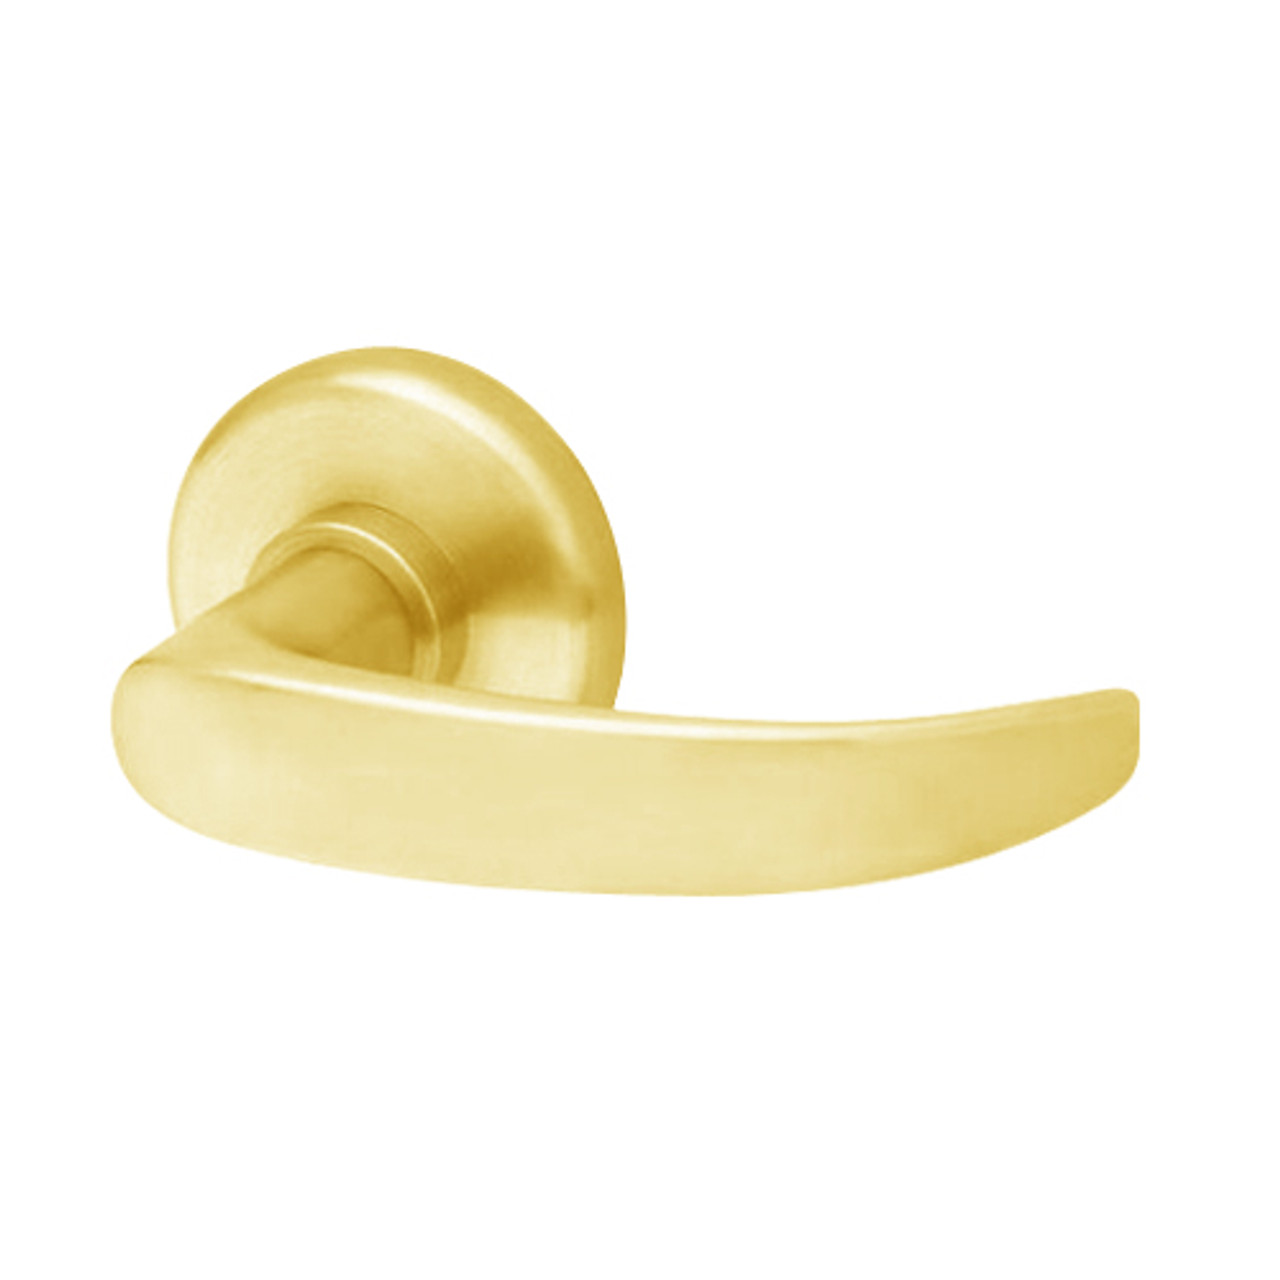 40HTKIS314H605 Best 40H Series Trim Kits Inside Lever w/ Cylinder with Curved Return Style in Bright Brass